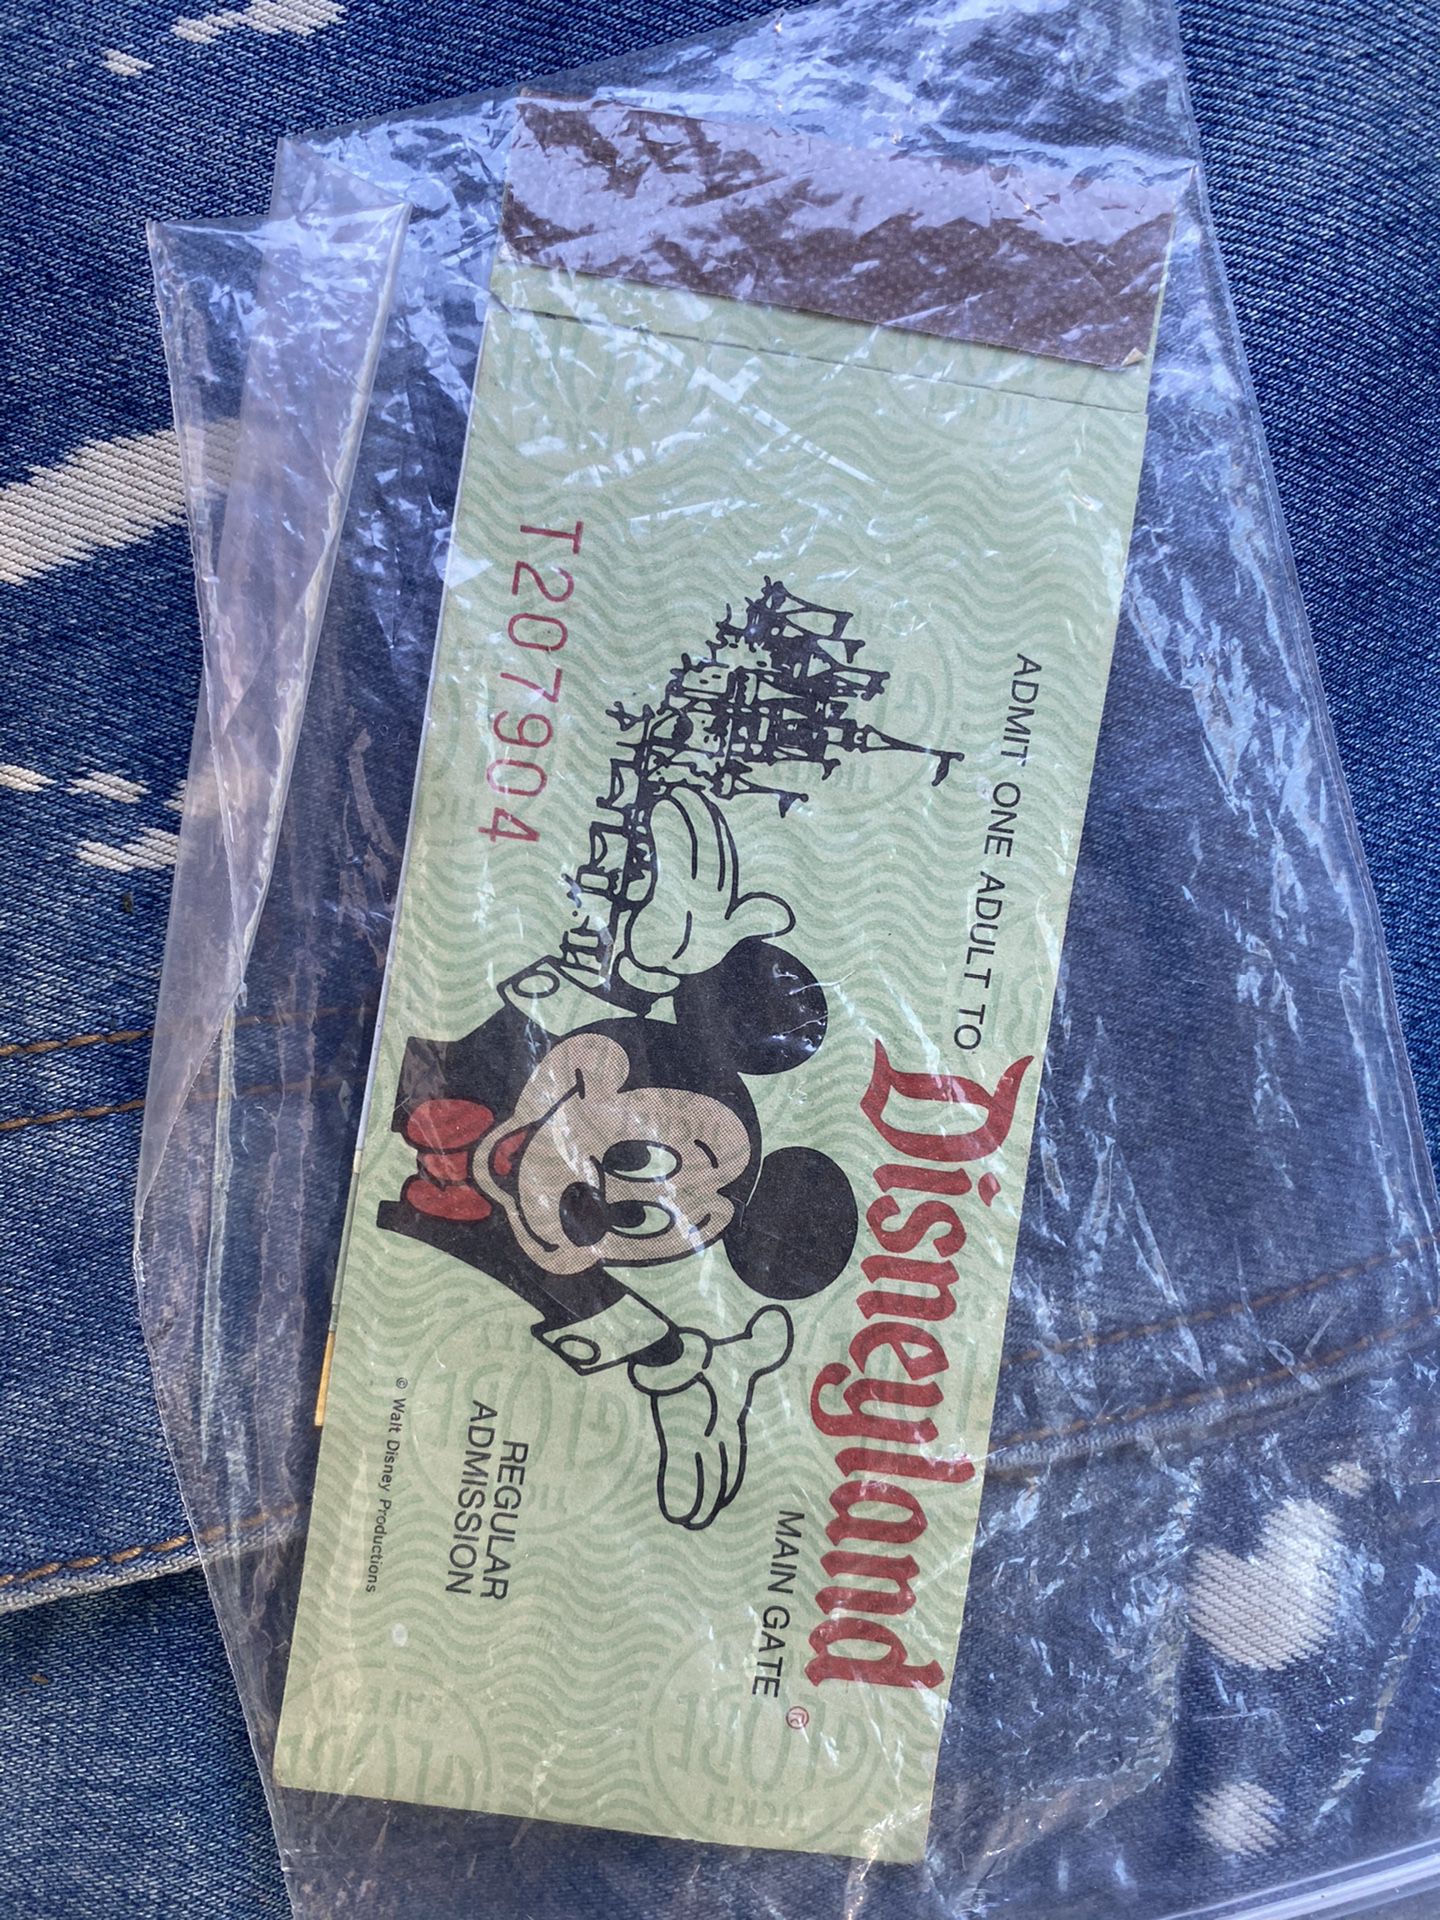 Disney & Toys “R” Us collectible tickets